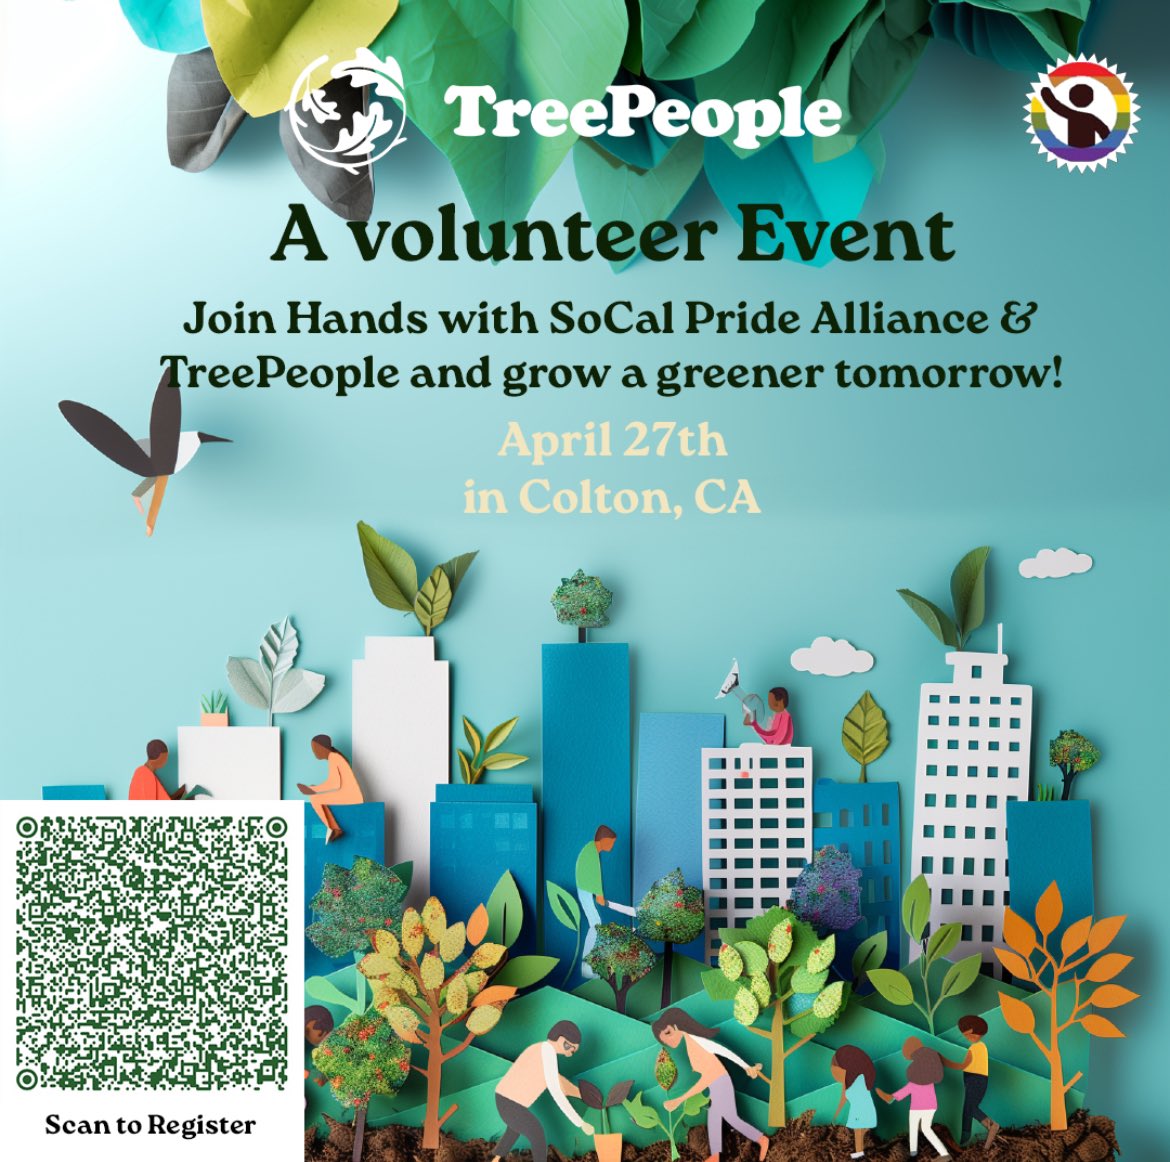 Join Hands with SoCal Pride Alliance & TreePeople and grow a greener tomorrow!
April 27th in Colton, CA
People need trees and trees need people! #treepeople #upspride #scpabrg #socallgbtabrg